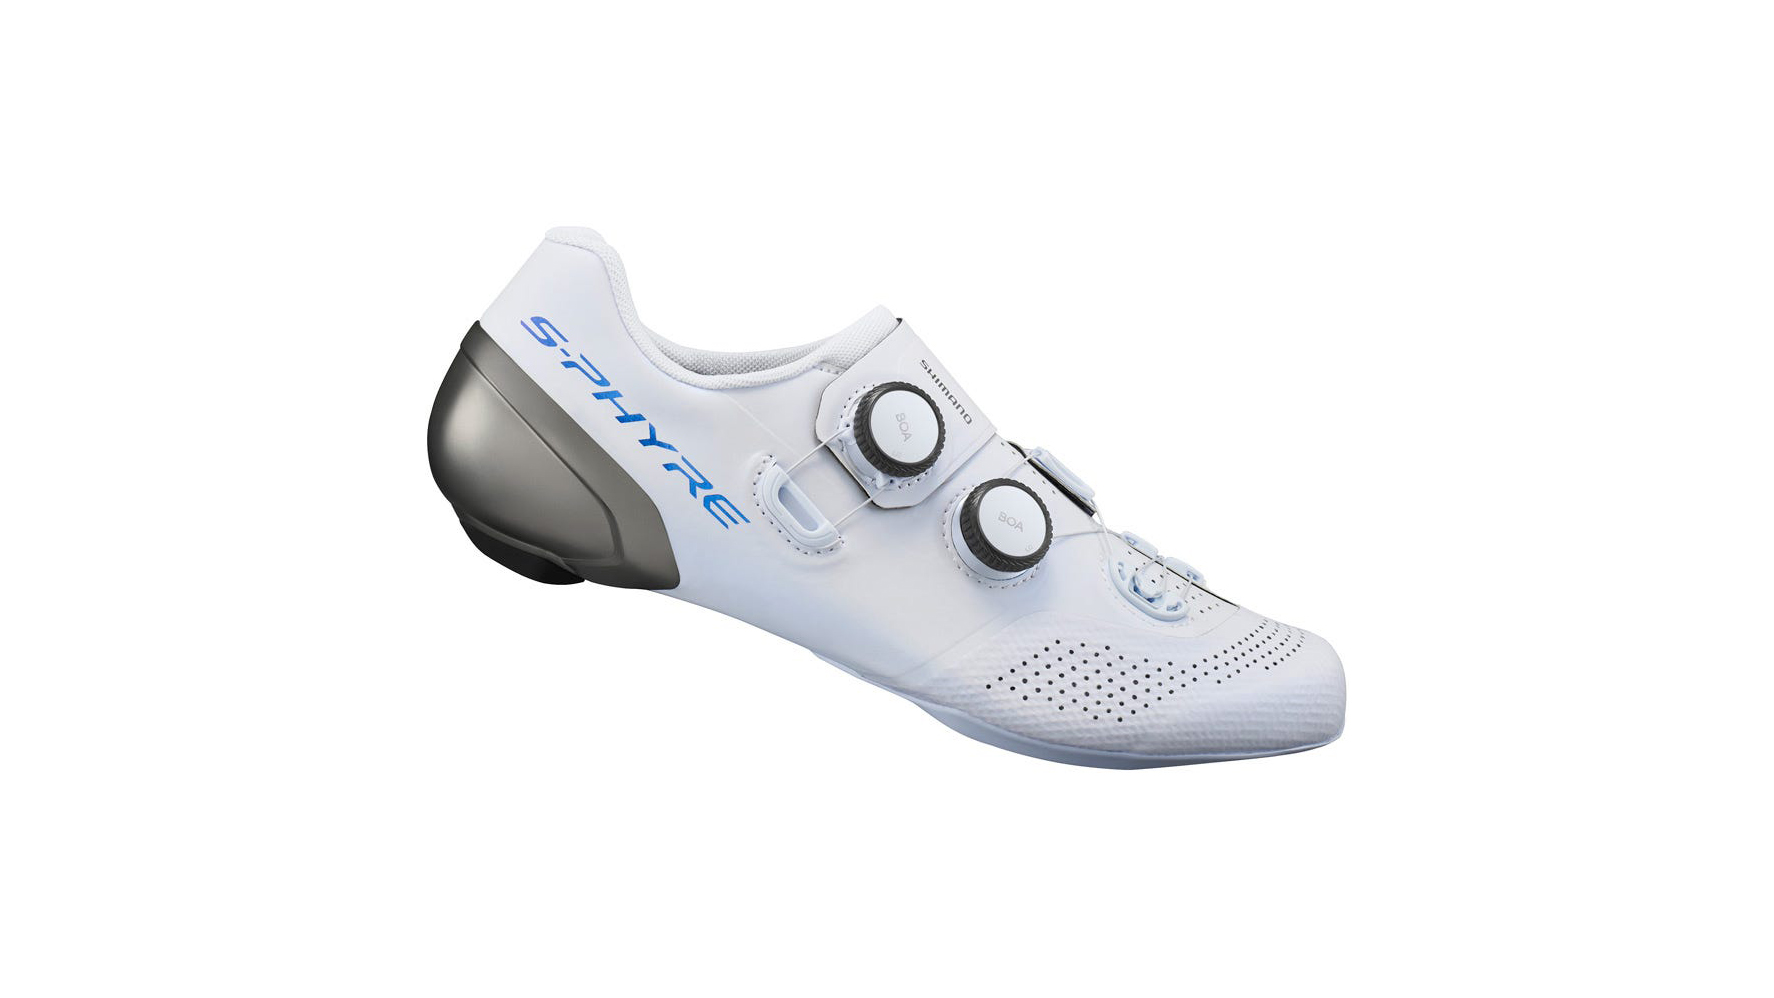 Best shoes for Peloton: Product image of cycling shoes